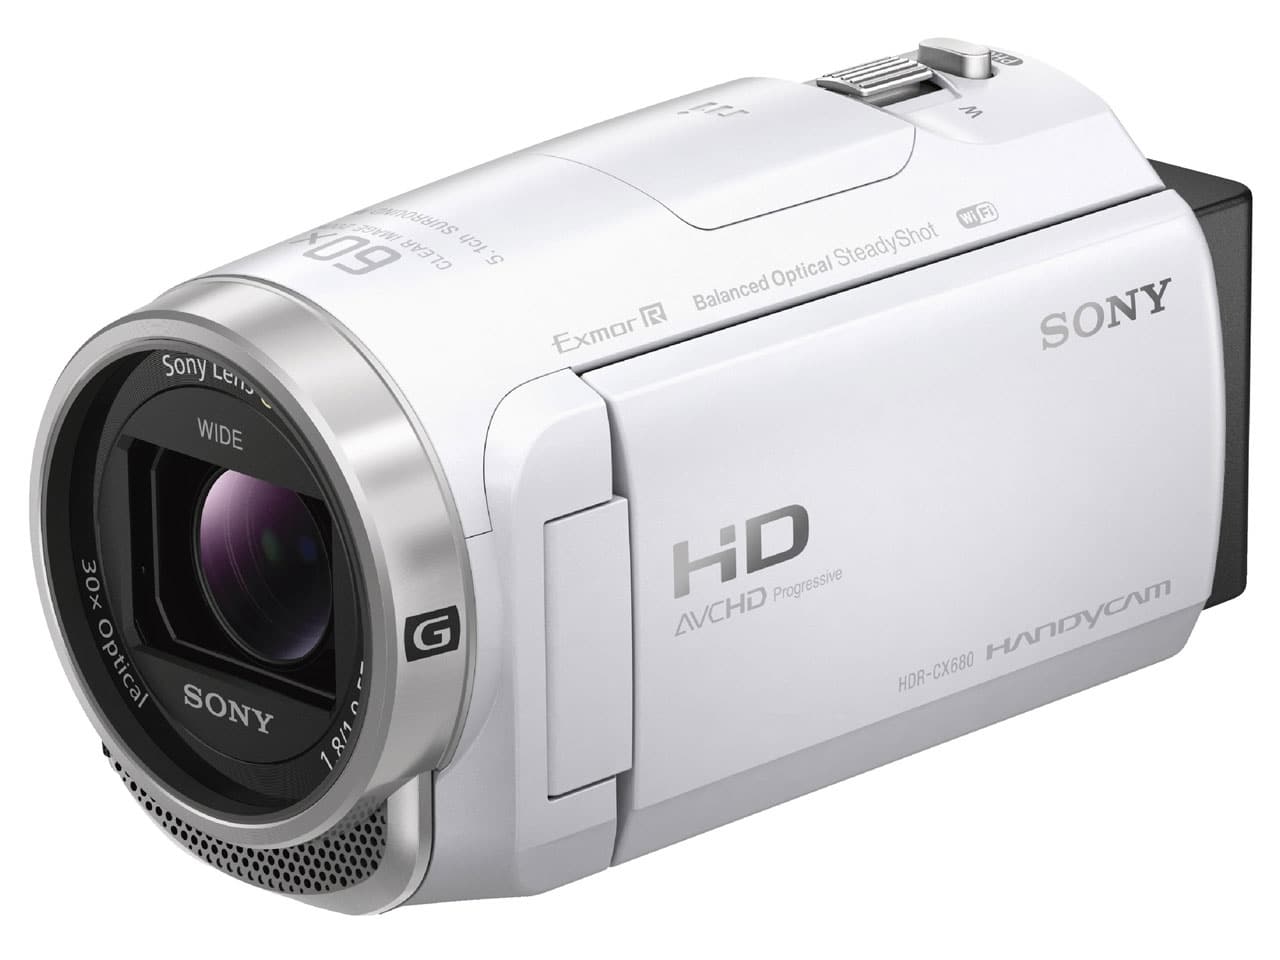 New]SONY HDR-CX680 (W) [white] JAN4548736055612 - BE FORWARD Store